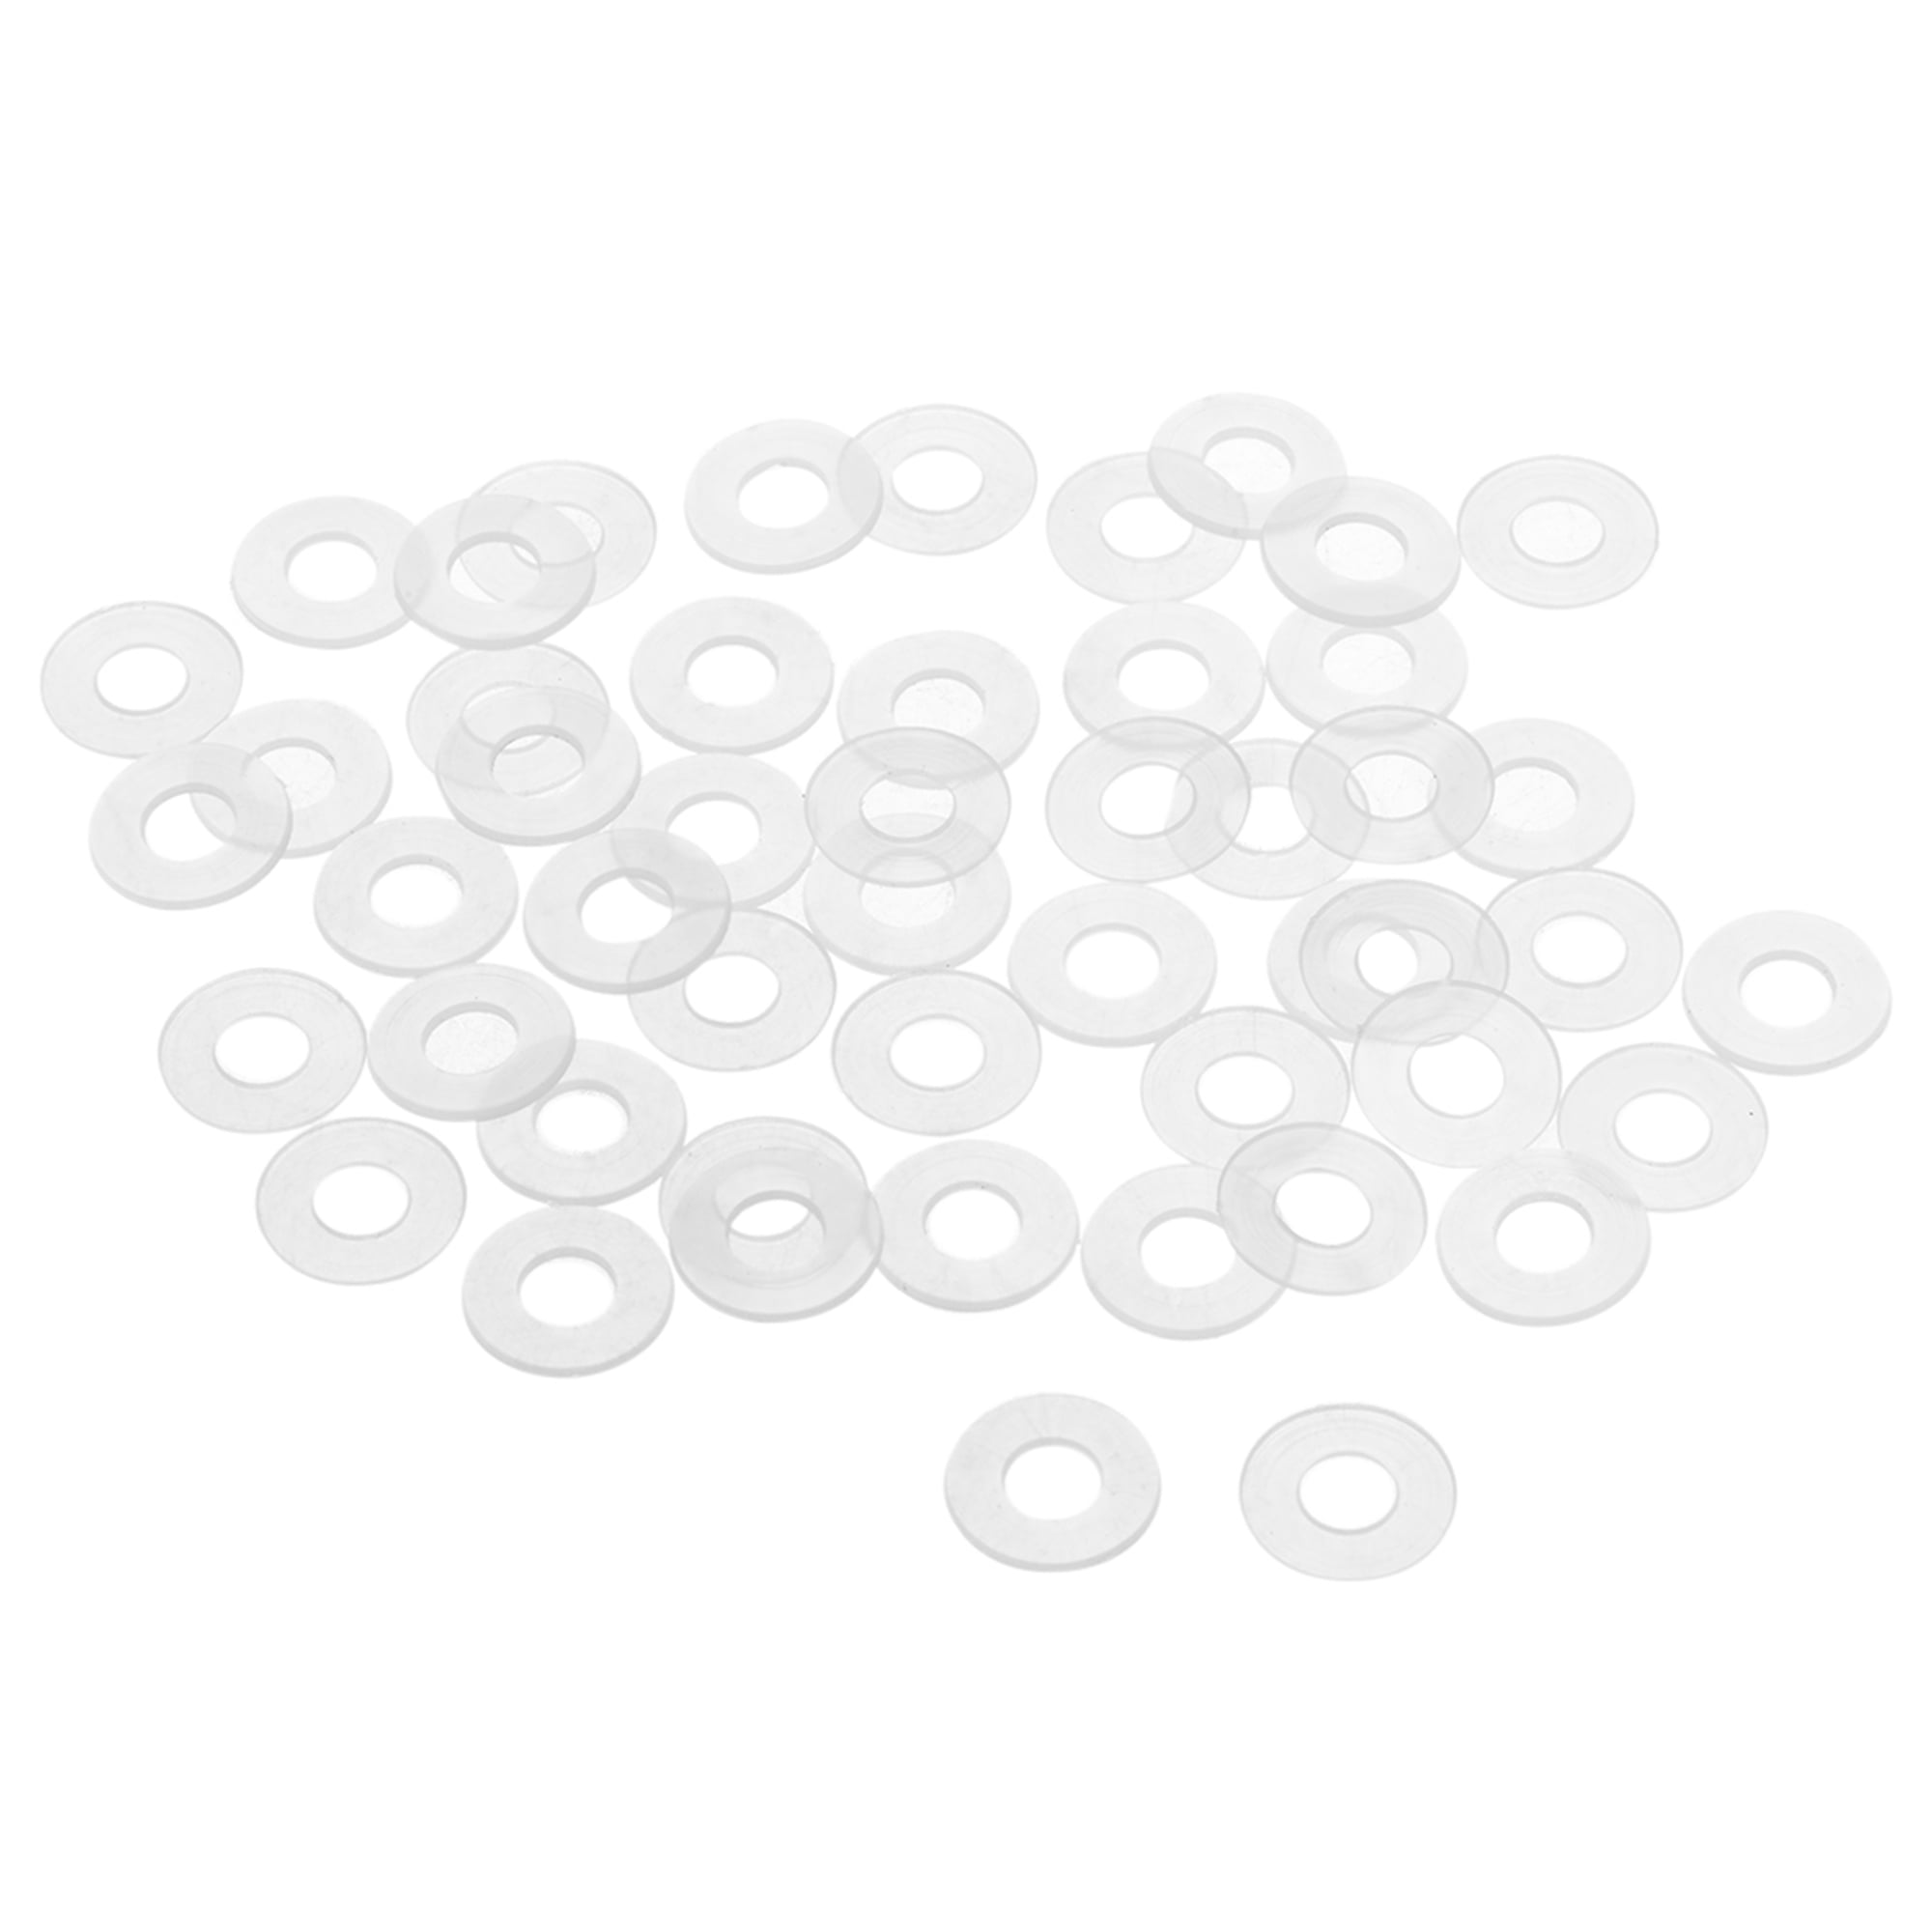 Pack of 12 M6 / 6mm, 30mm Black Nylon SPACERS Plastic Standoff Washers